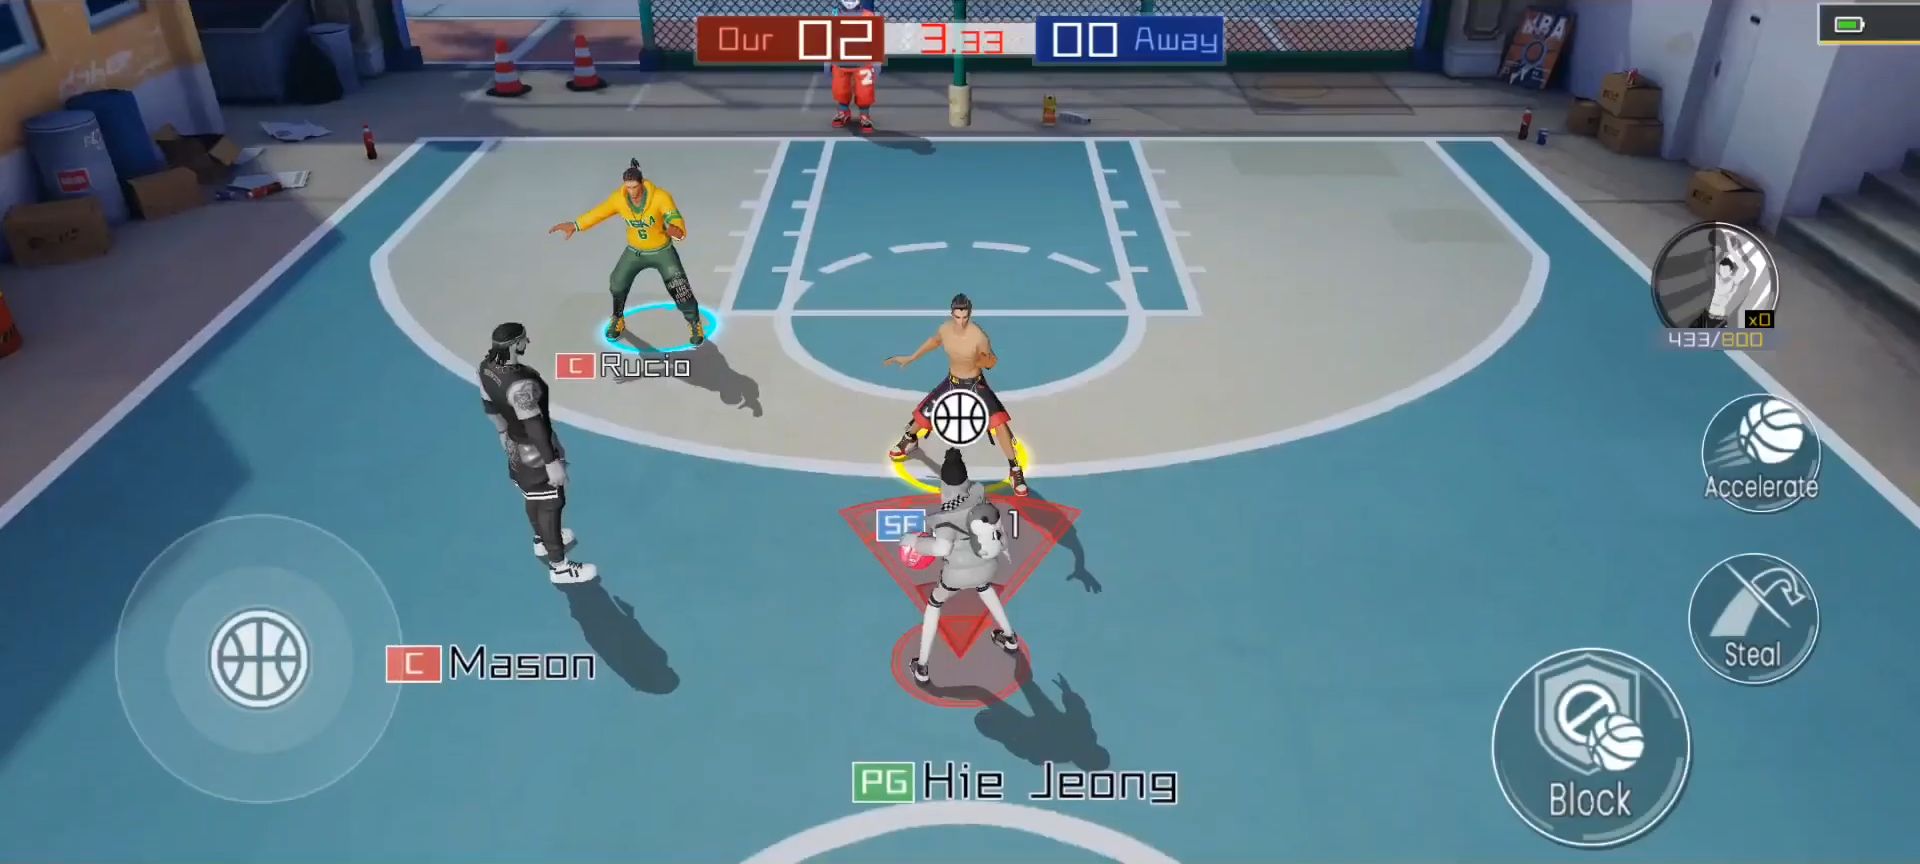 Streetball2: On Fire - Android game screenshots.